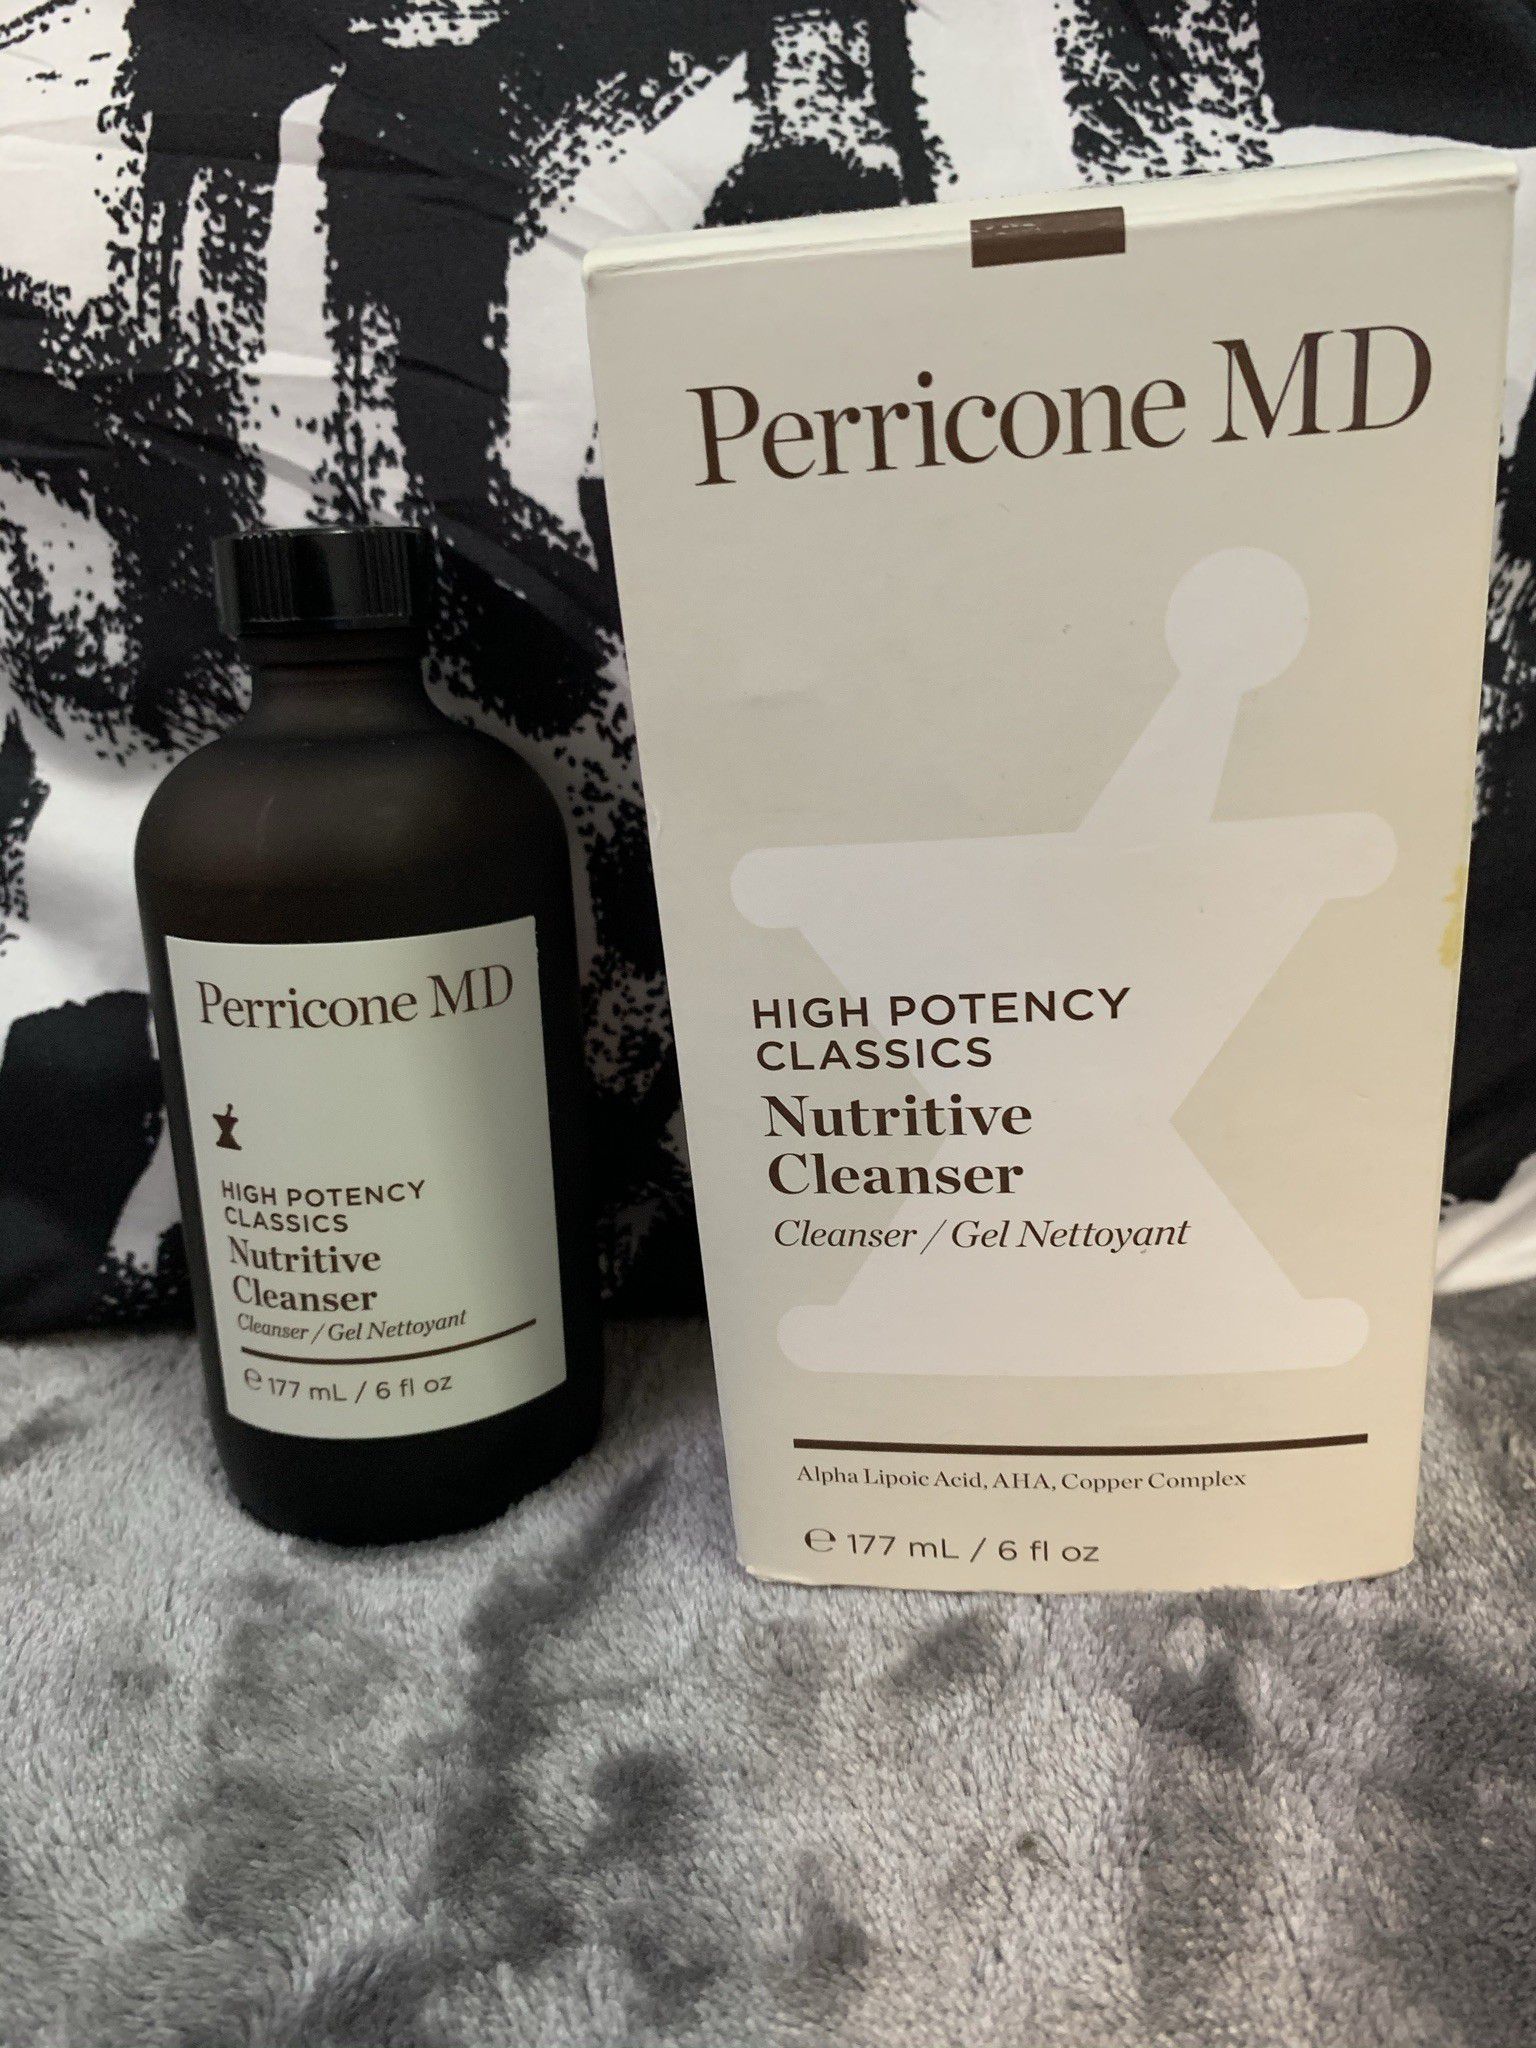 Pericone MD High Potency Cliassic Nutritive Cleanser